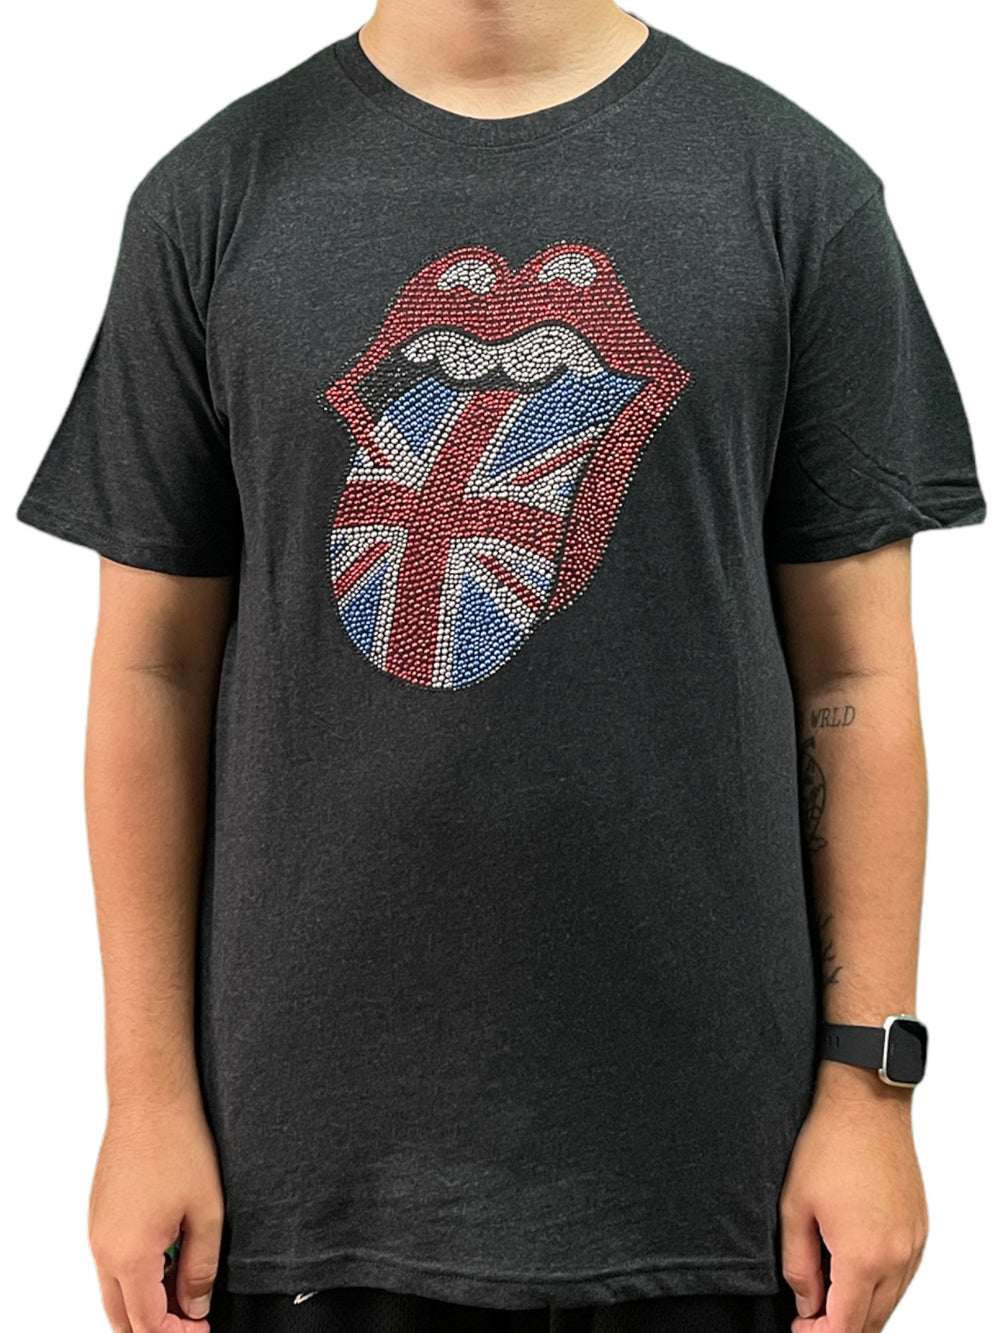 Rolling Stones The - RHINSTONE Unisex Official T Shirt Various Sizes NEW